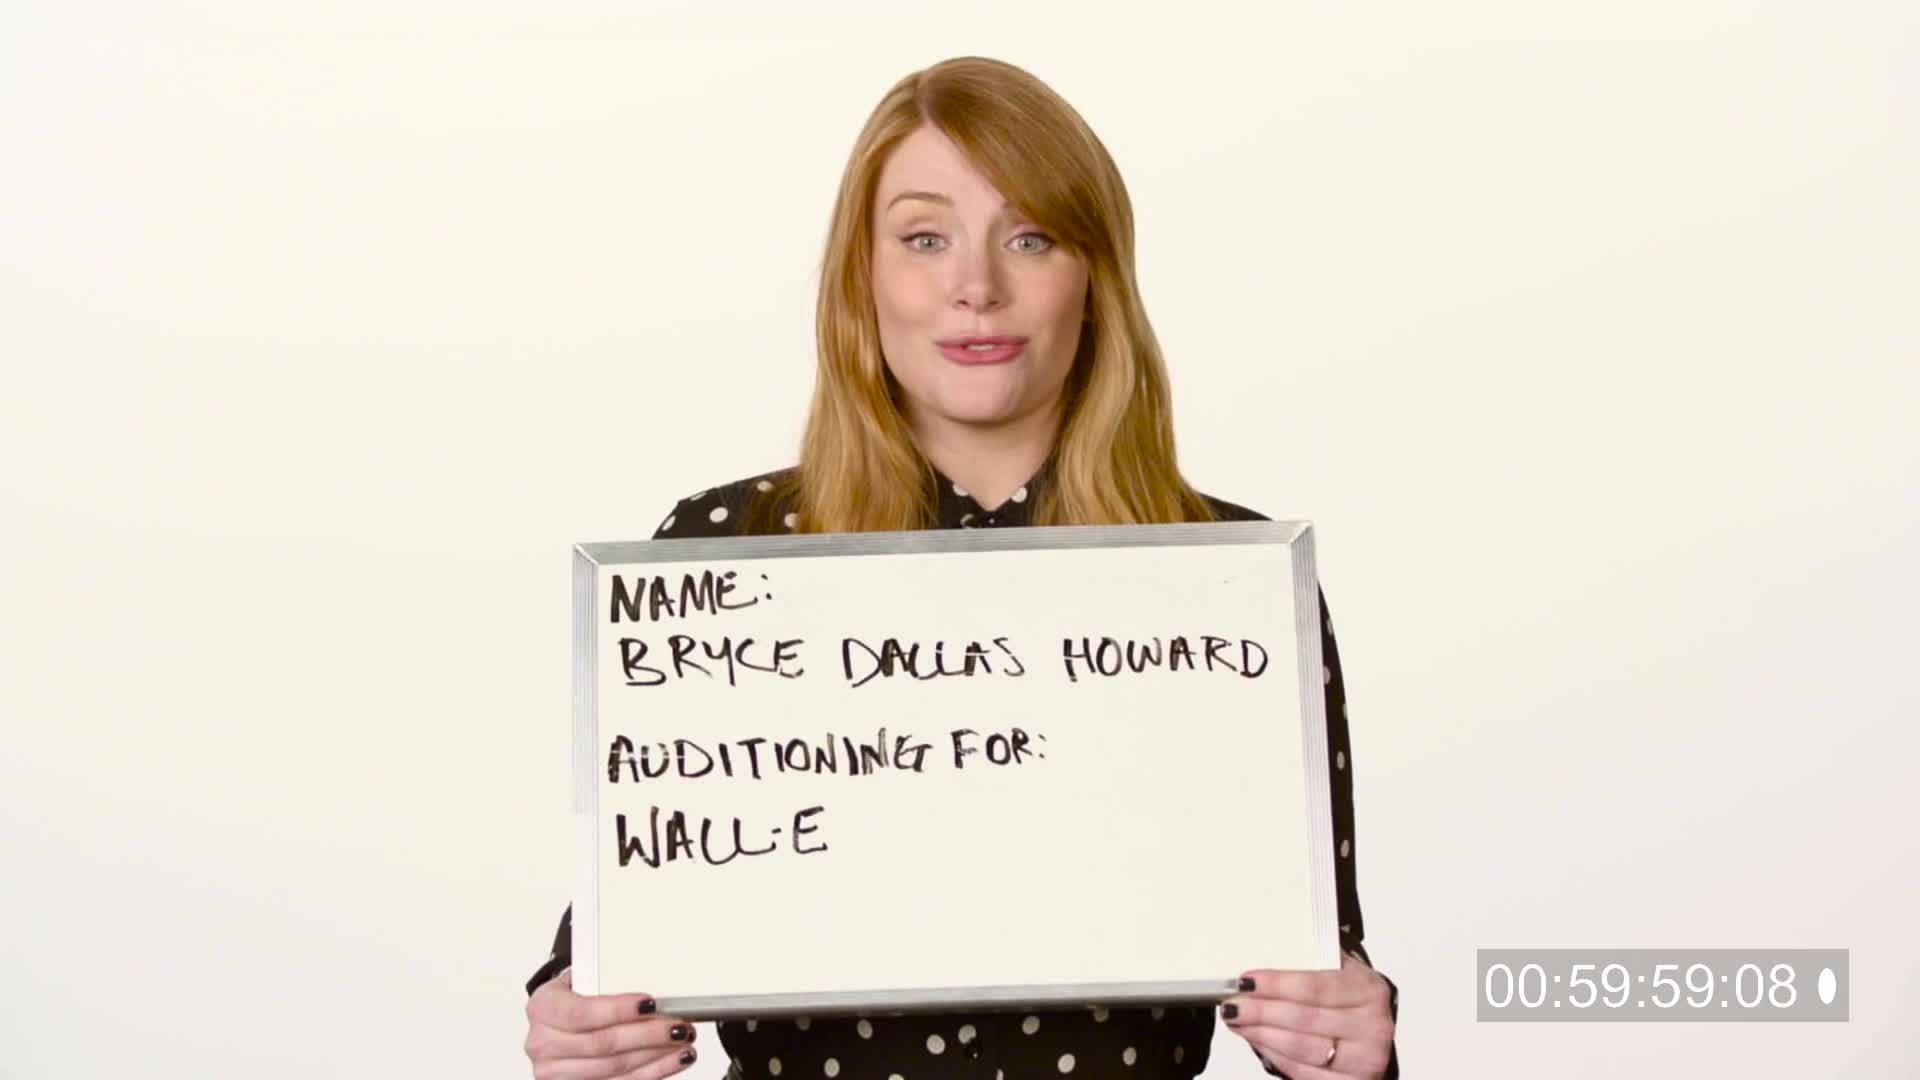 Disney Failed Auditions with Bryce Dallas Howard | Oh My Disney